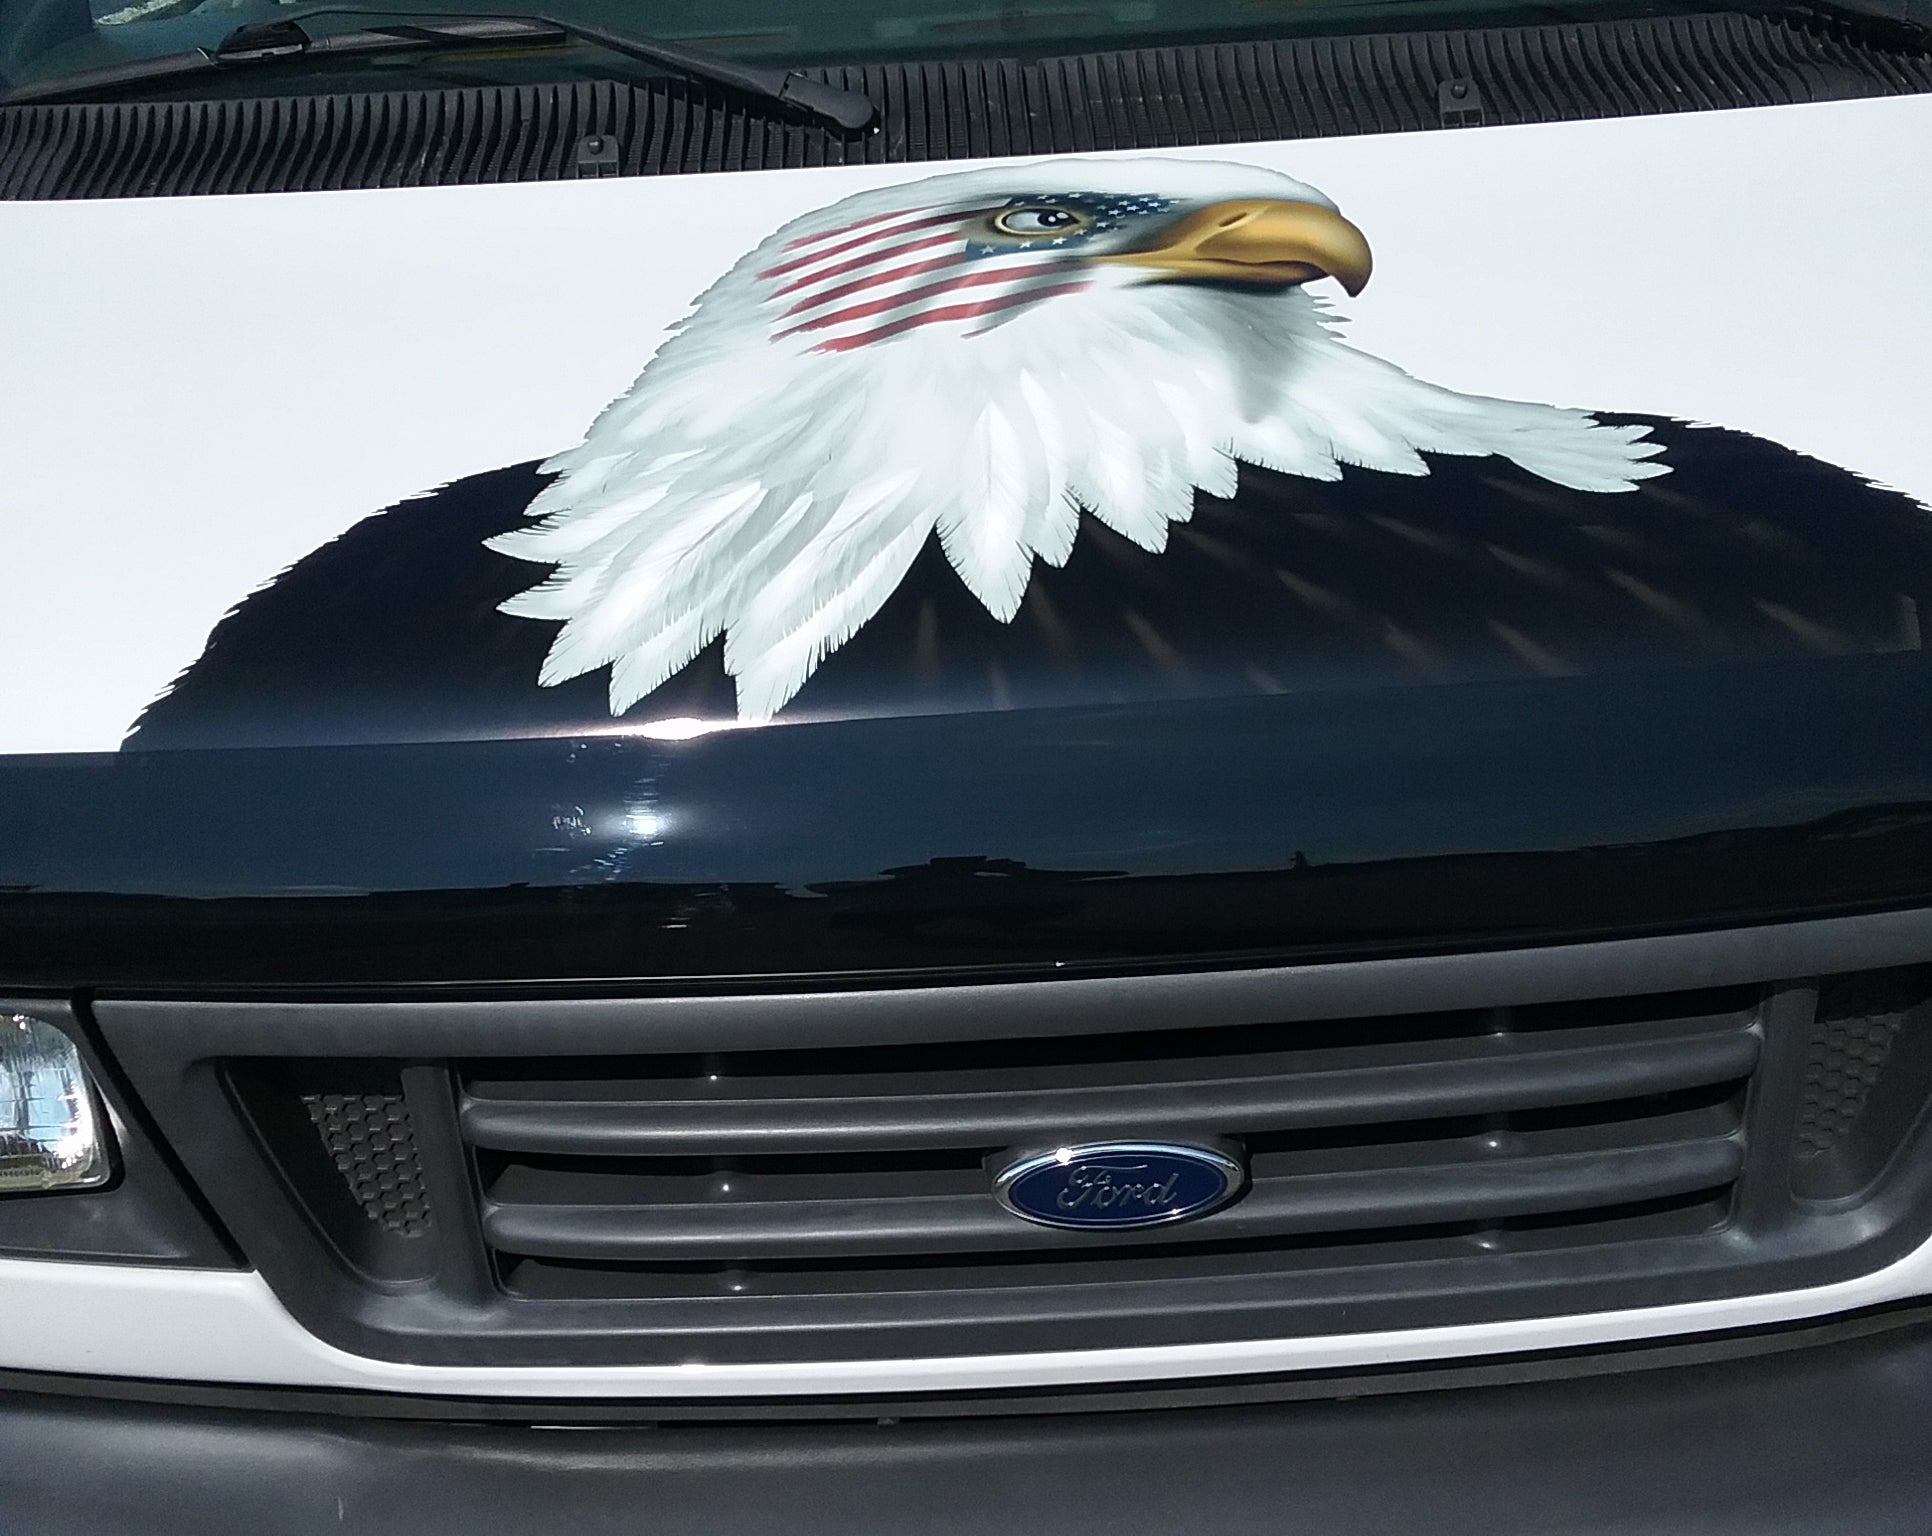 bald eagle with american flag decal on the hood of a white van